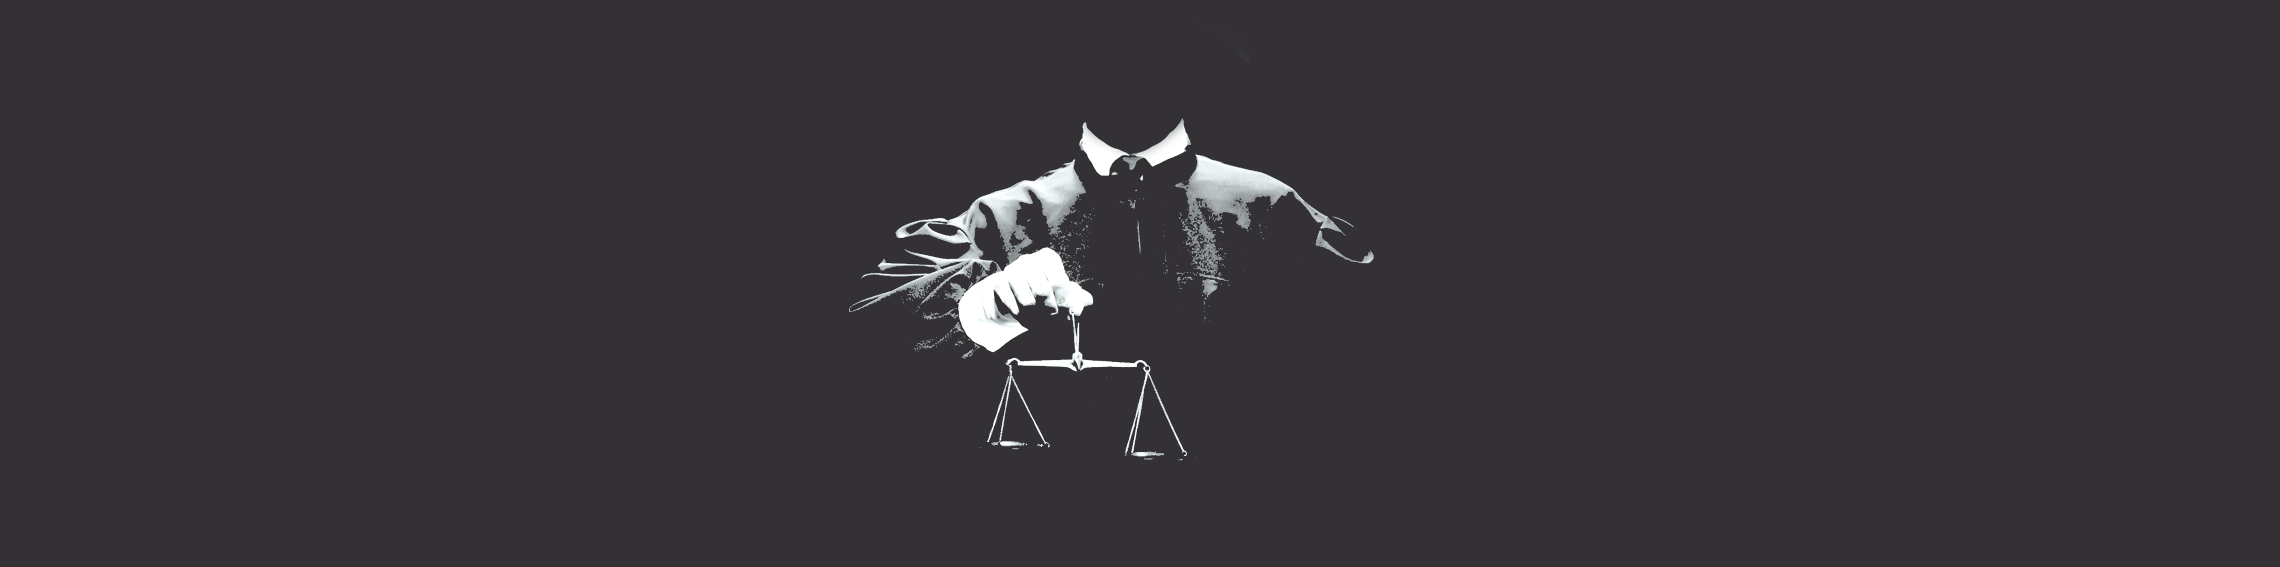 spooky headless judge holding scales of justice against a black background